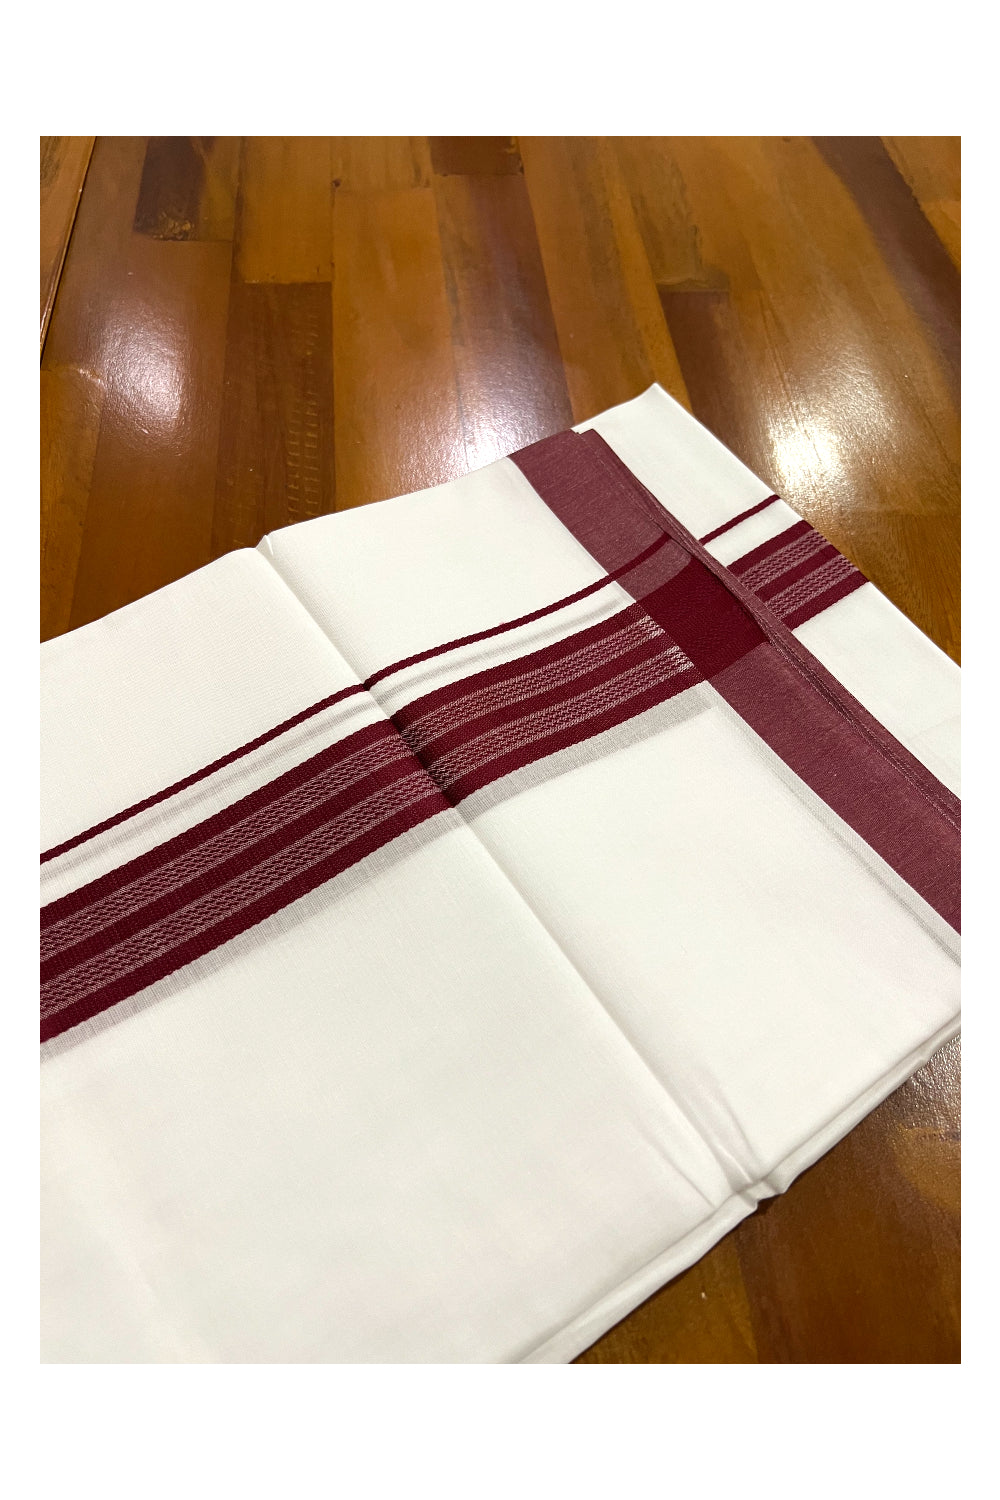 Pure White Cotton Double Mundu with Maroon Border (South Indian Dhoti)